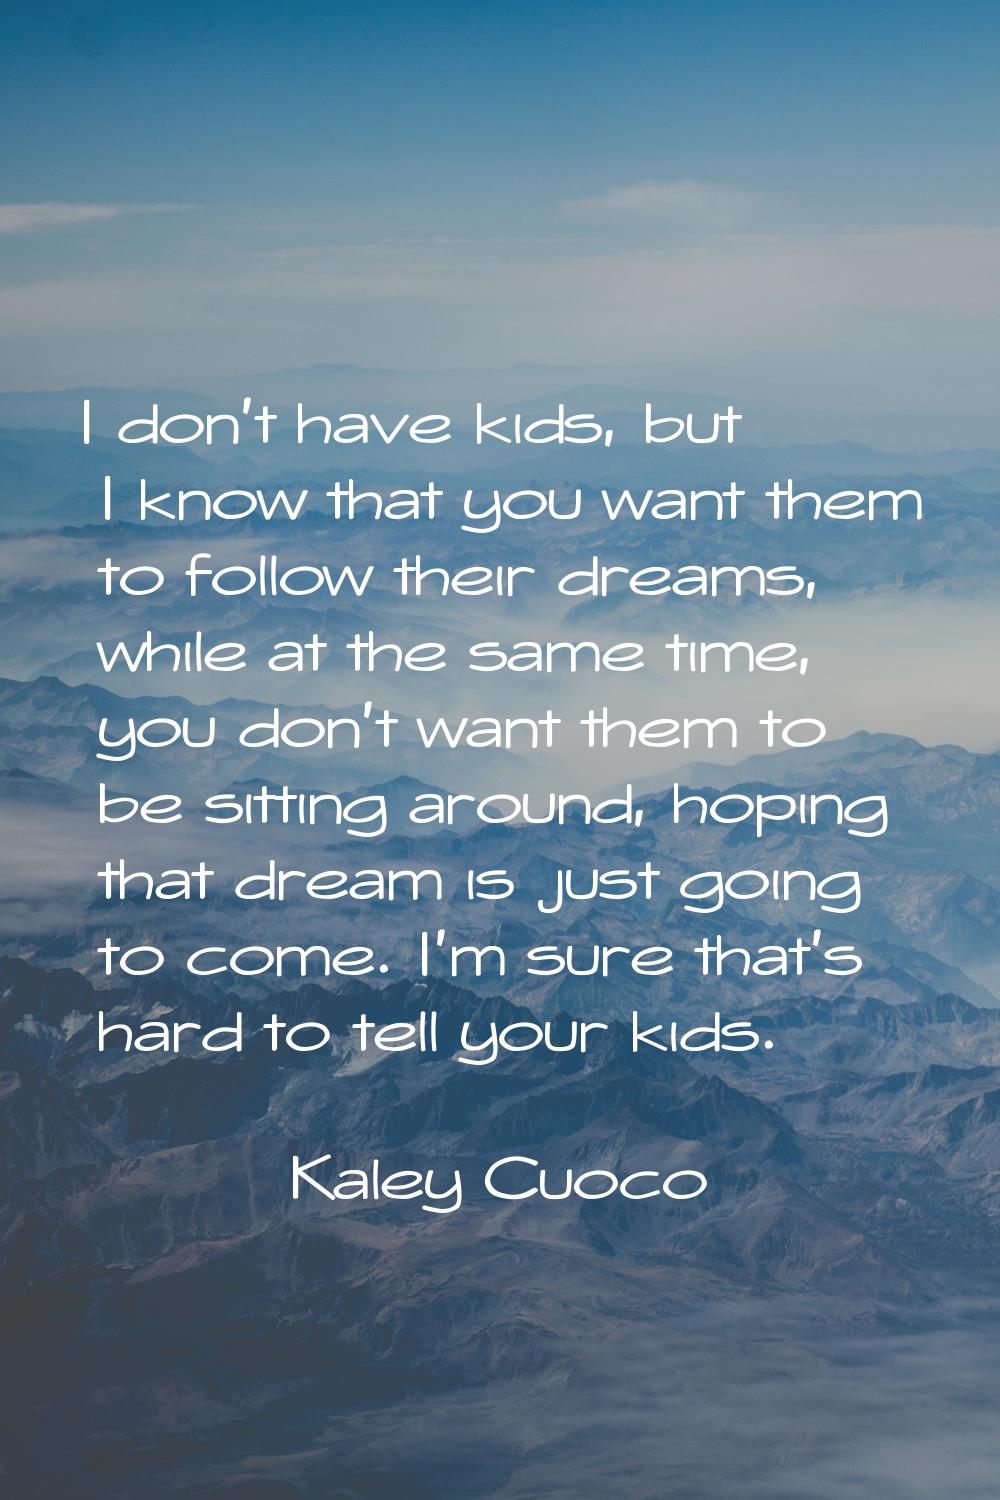 I don't have kids, but I know that you want them to follow their dreams, while at the same time, yo